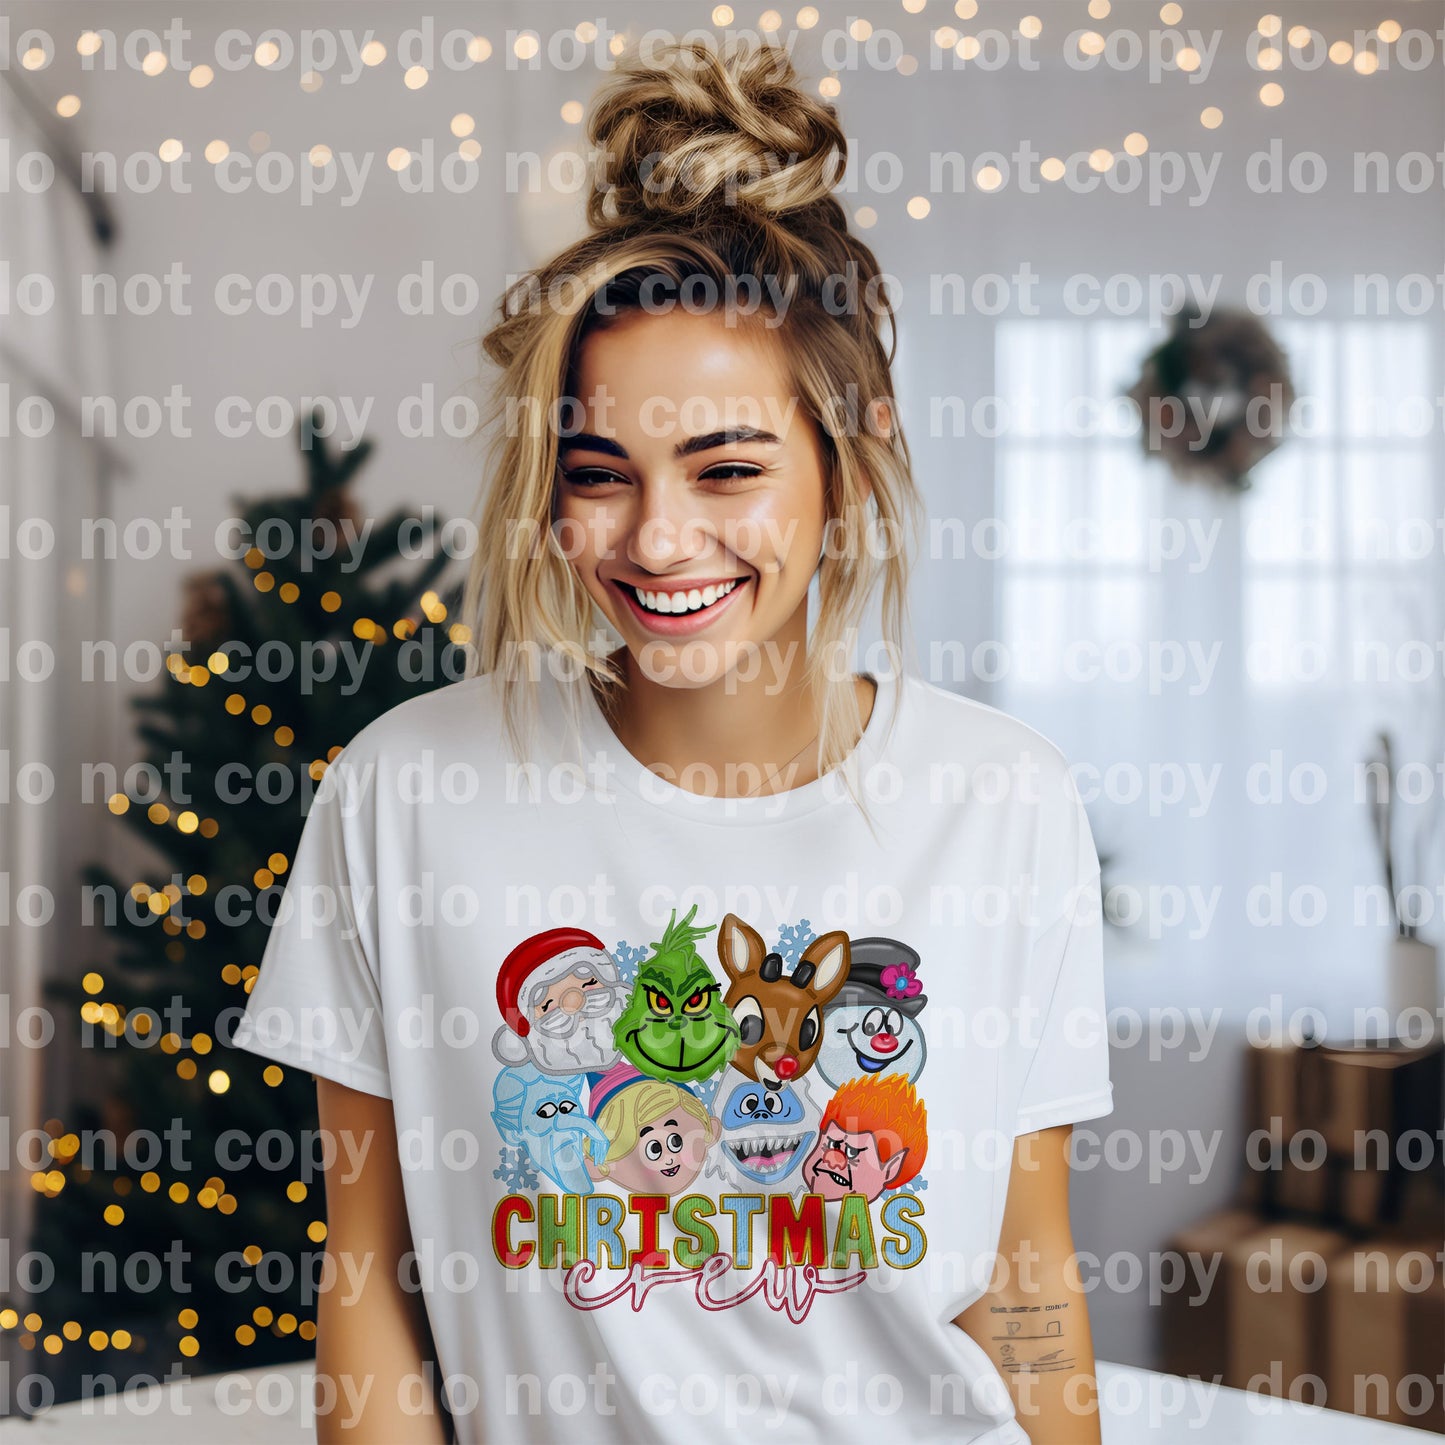 Christmas Crew No Glitter with Optional Sleeve Design Dream Print or Sublimation Print